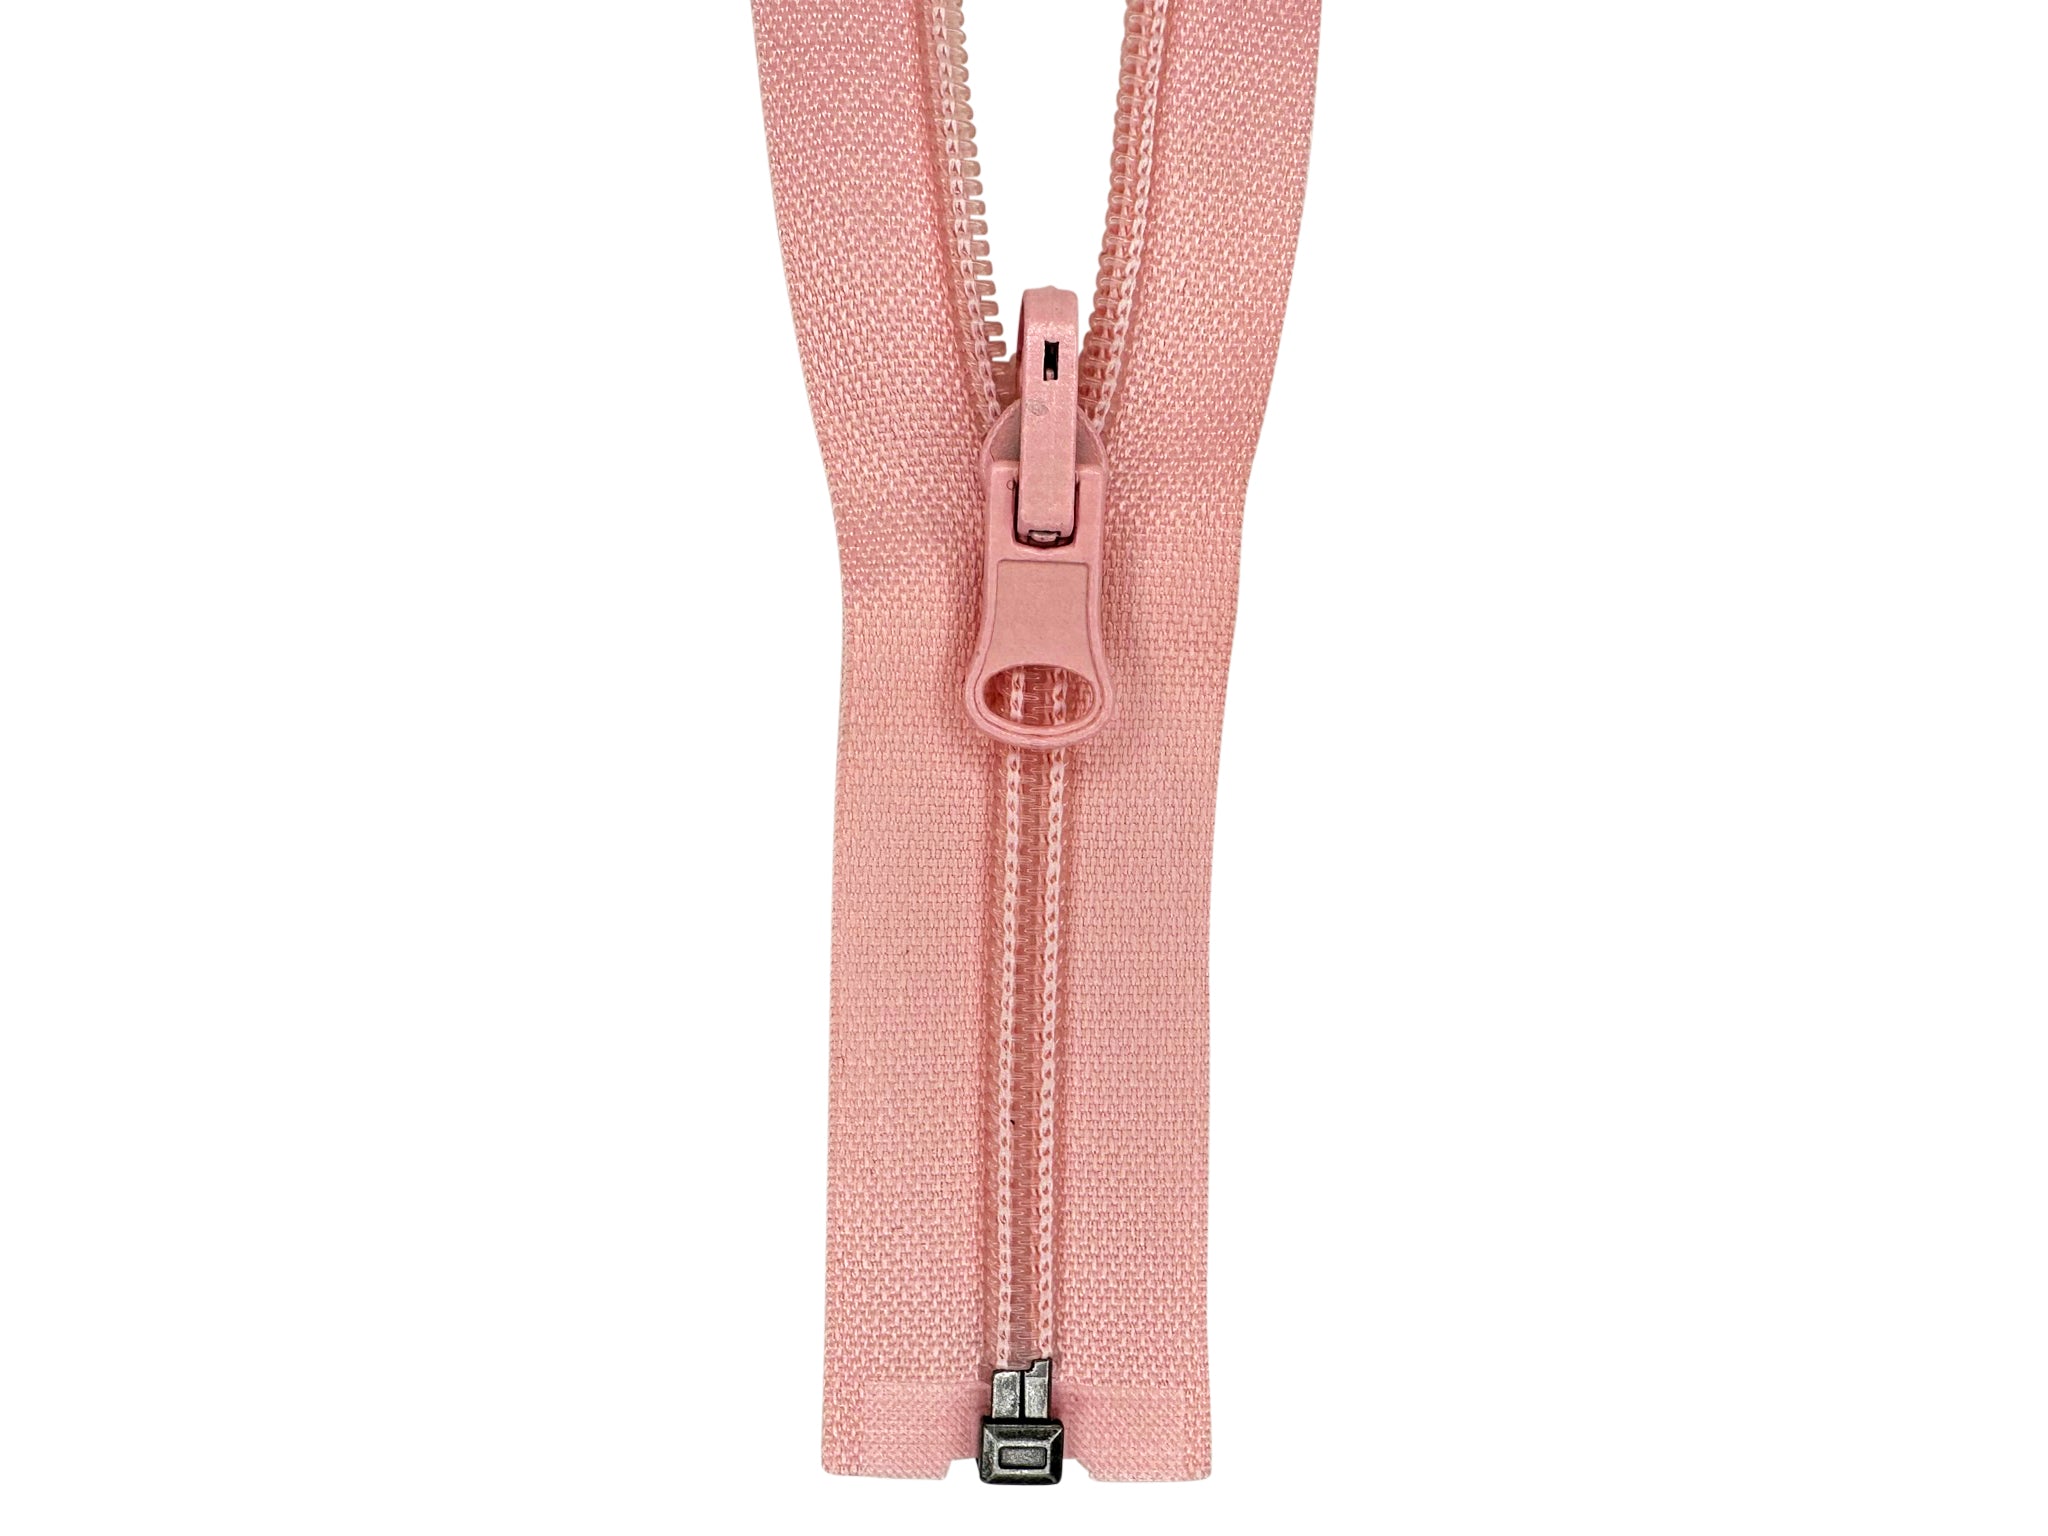 Zippers: What is the Difference between dress and handbag zippers?